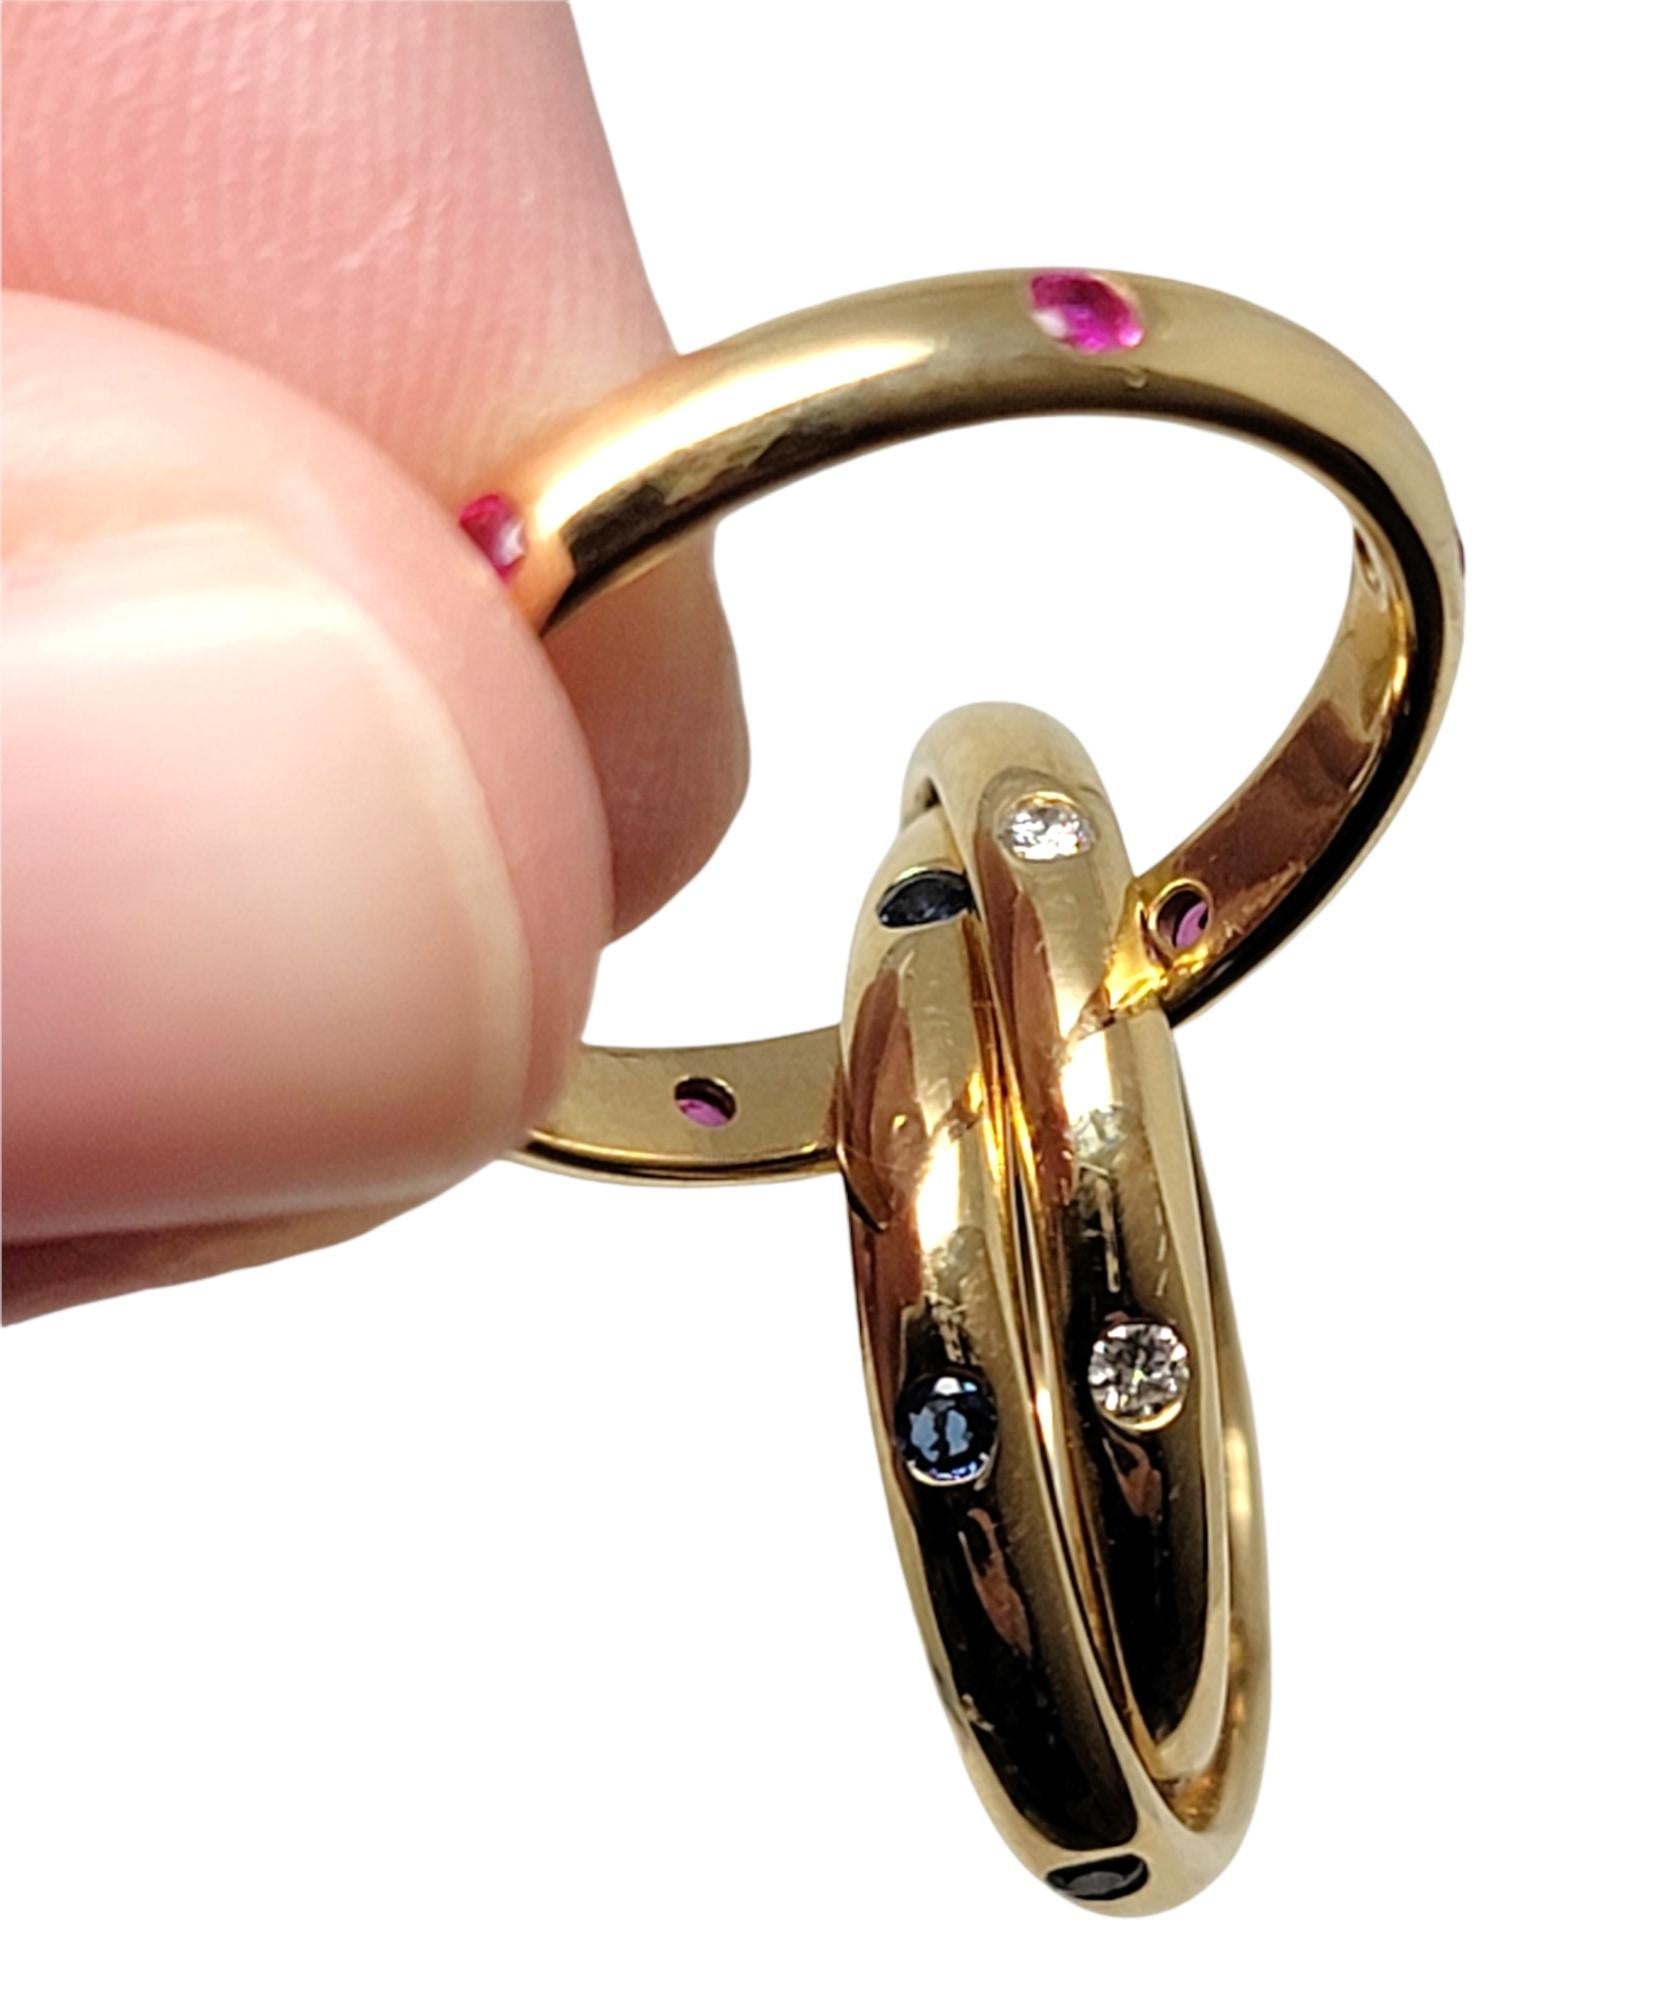 Women's Cartier Diamond, Sapphire and Ruby Trinity Band Ring in 18 Karat Yellow Gold 48